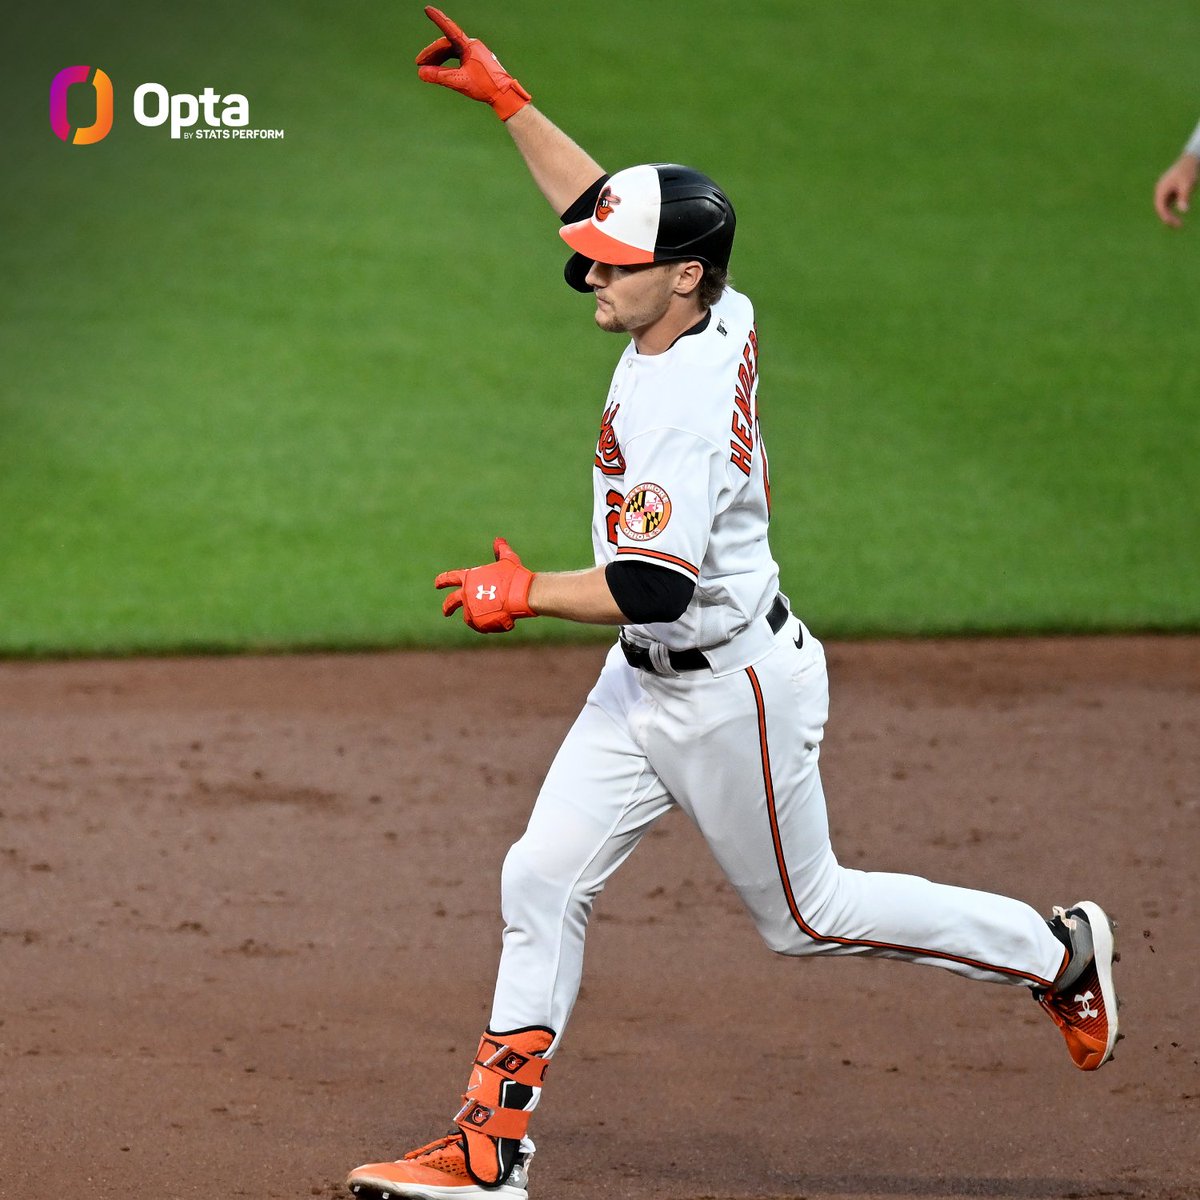 Gunnar Henderson over the @Orioles' last 5 games:

- a dozen hits
- multiple steals
- home run cycle (solo, 2-run, 3-run, grand slam)
- 5-0 record

No other player in MLB history has done all of that over a span of 5 team games.